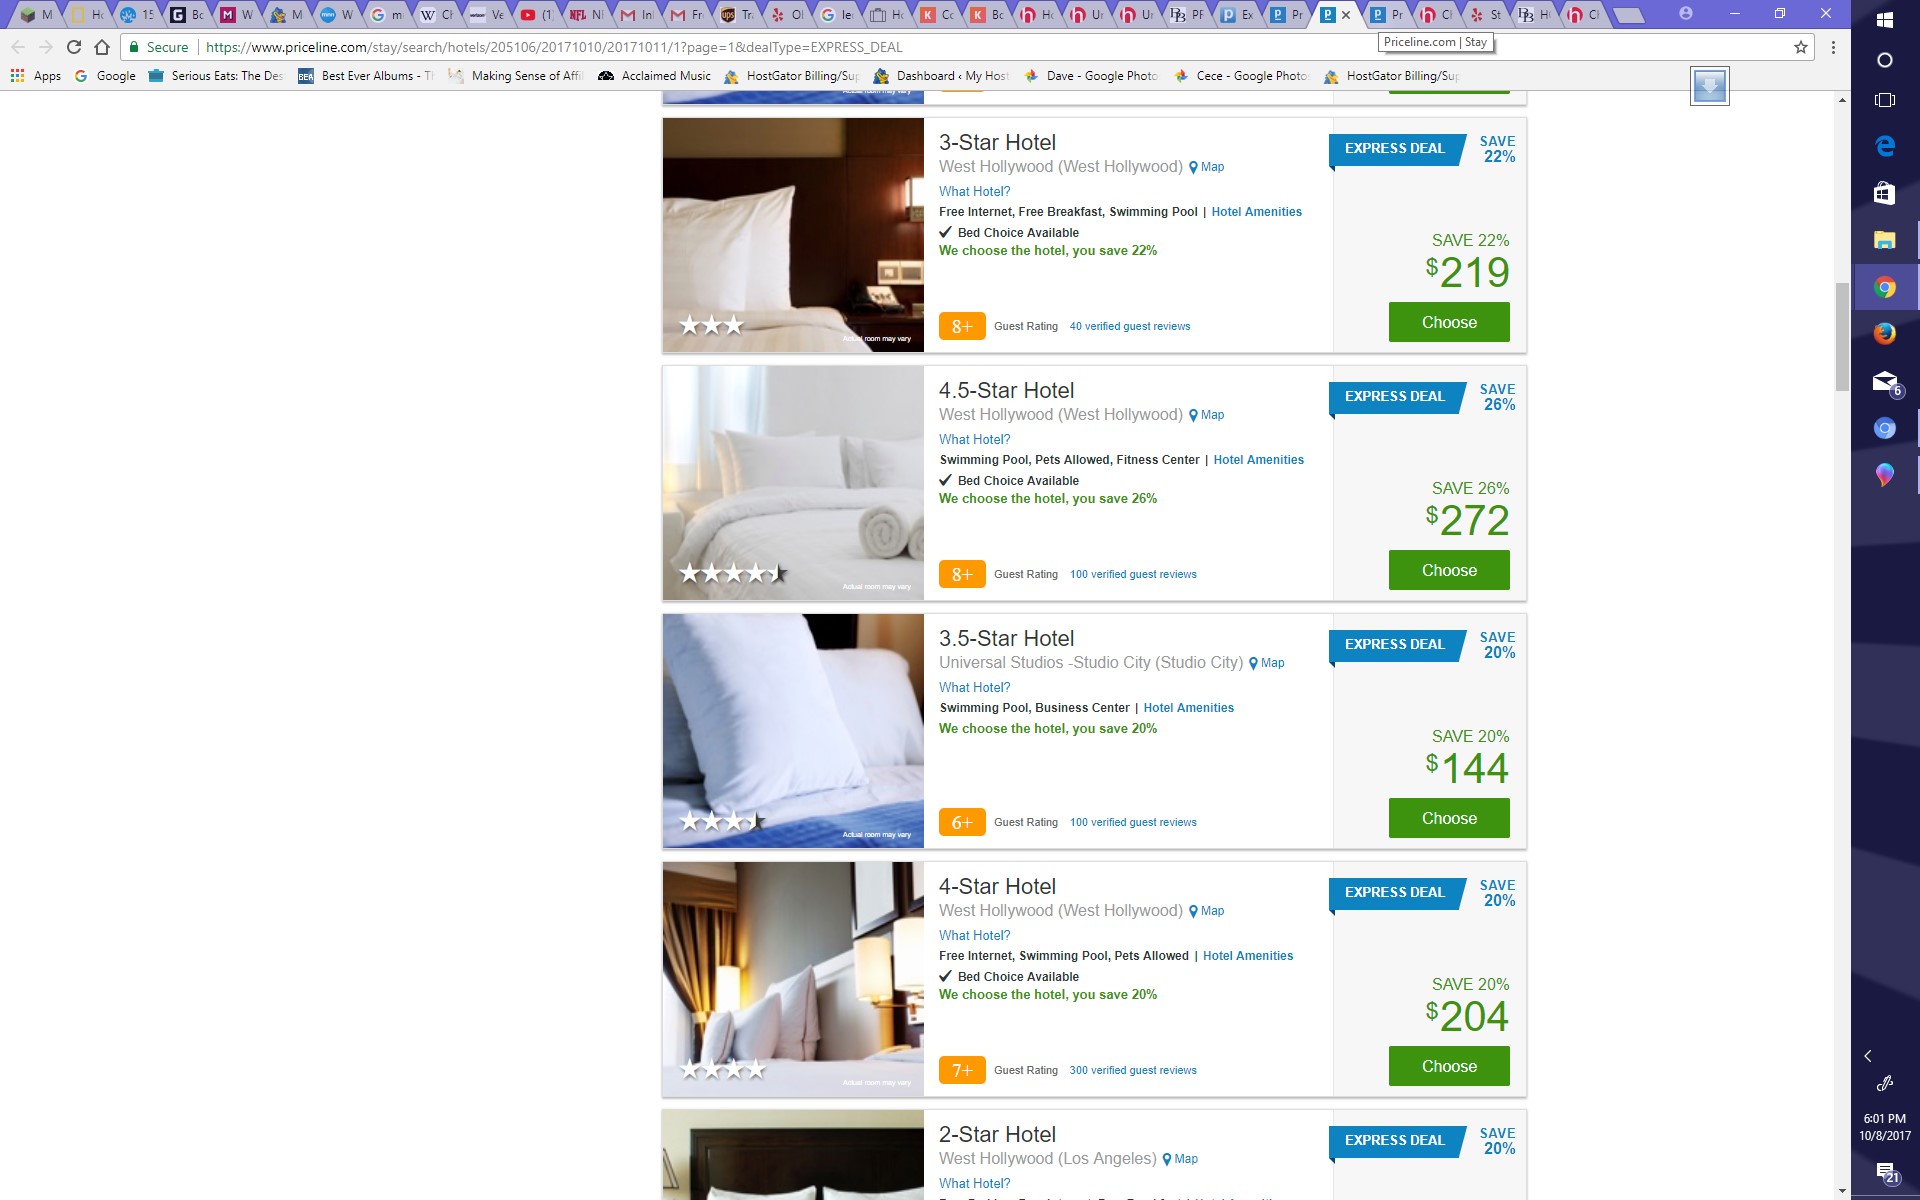 Finding Specific Hotels with Better Bidding on Hotwire and Priceline